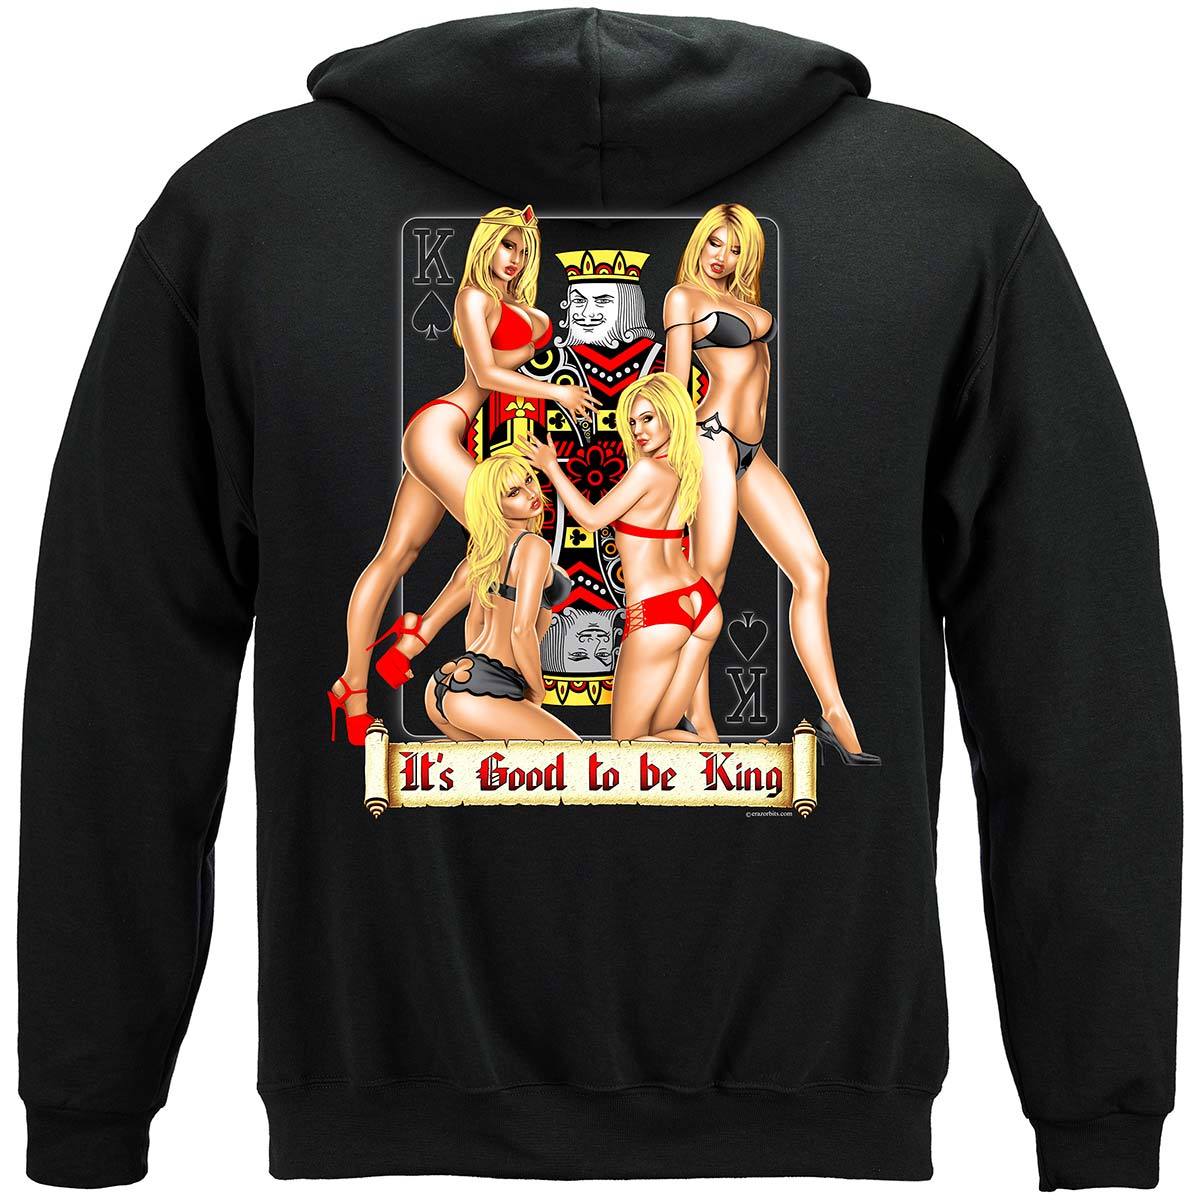 Its Good To Be King Premium Hooded Sweat Shirt